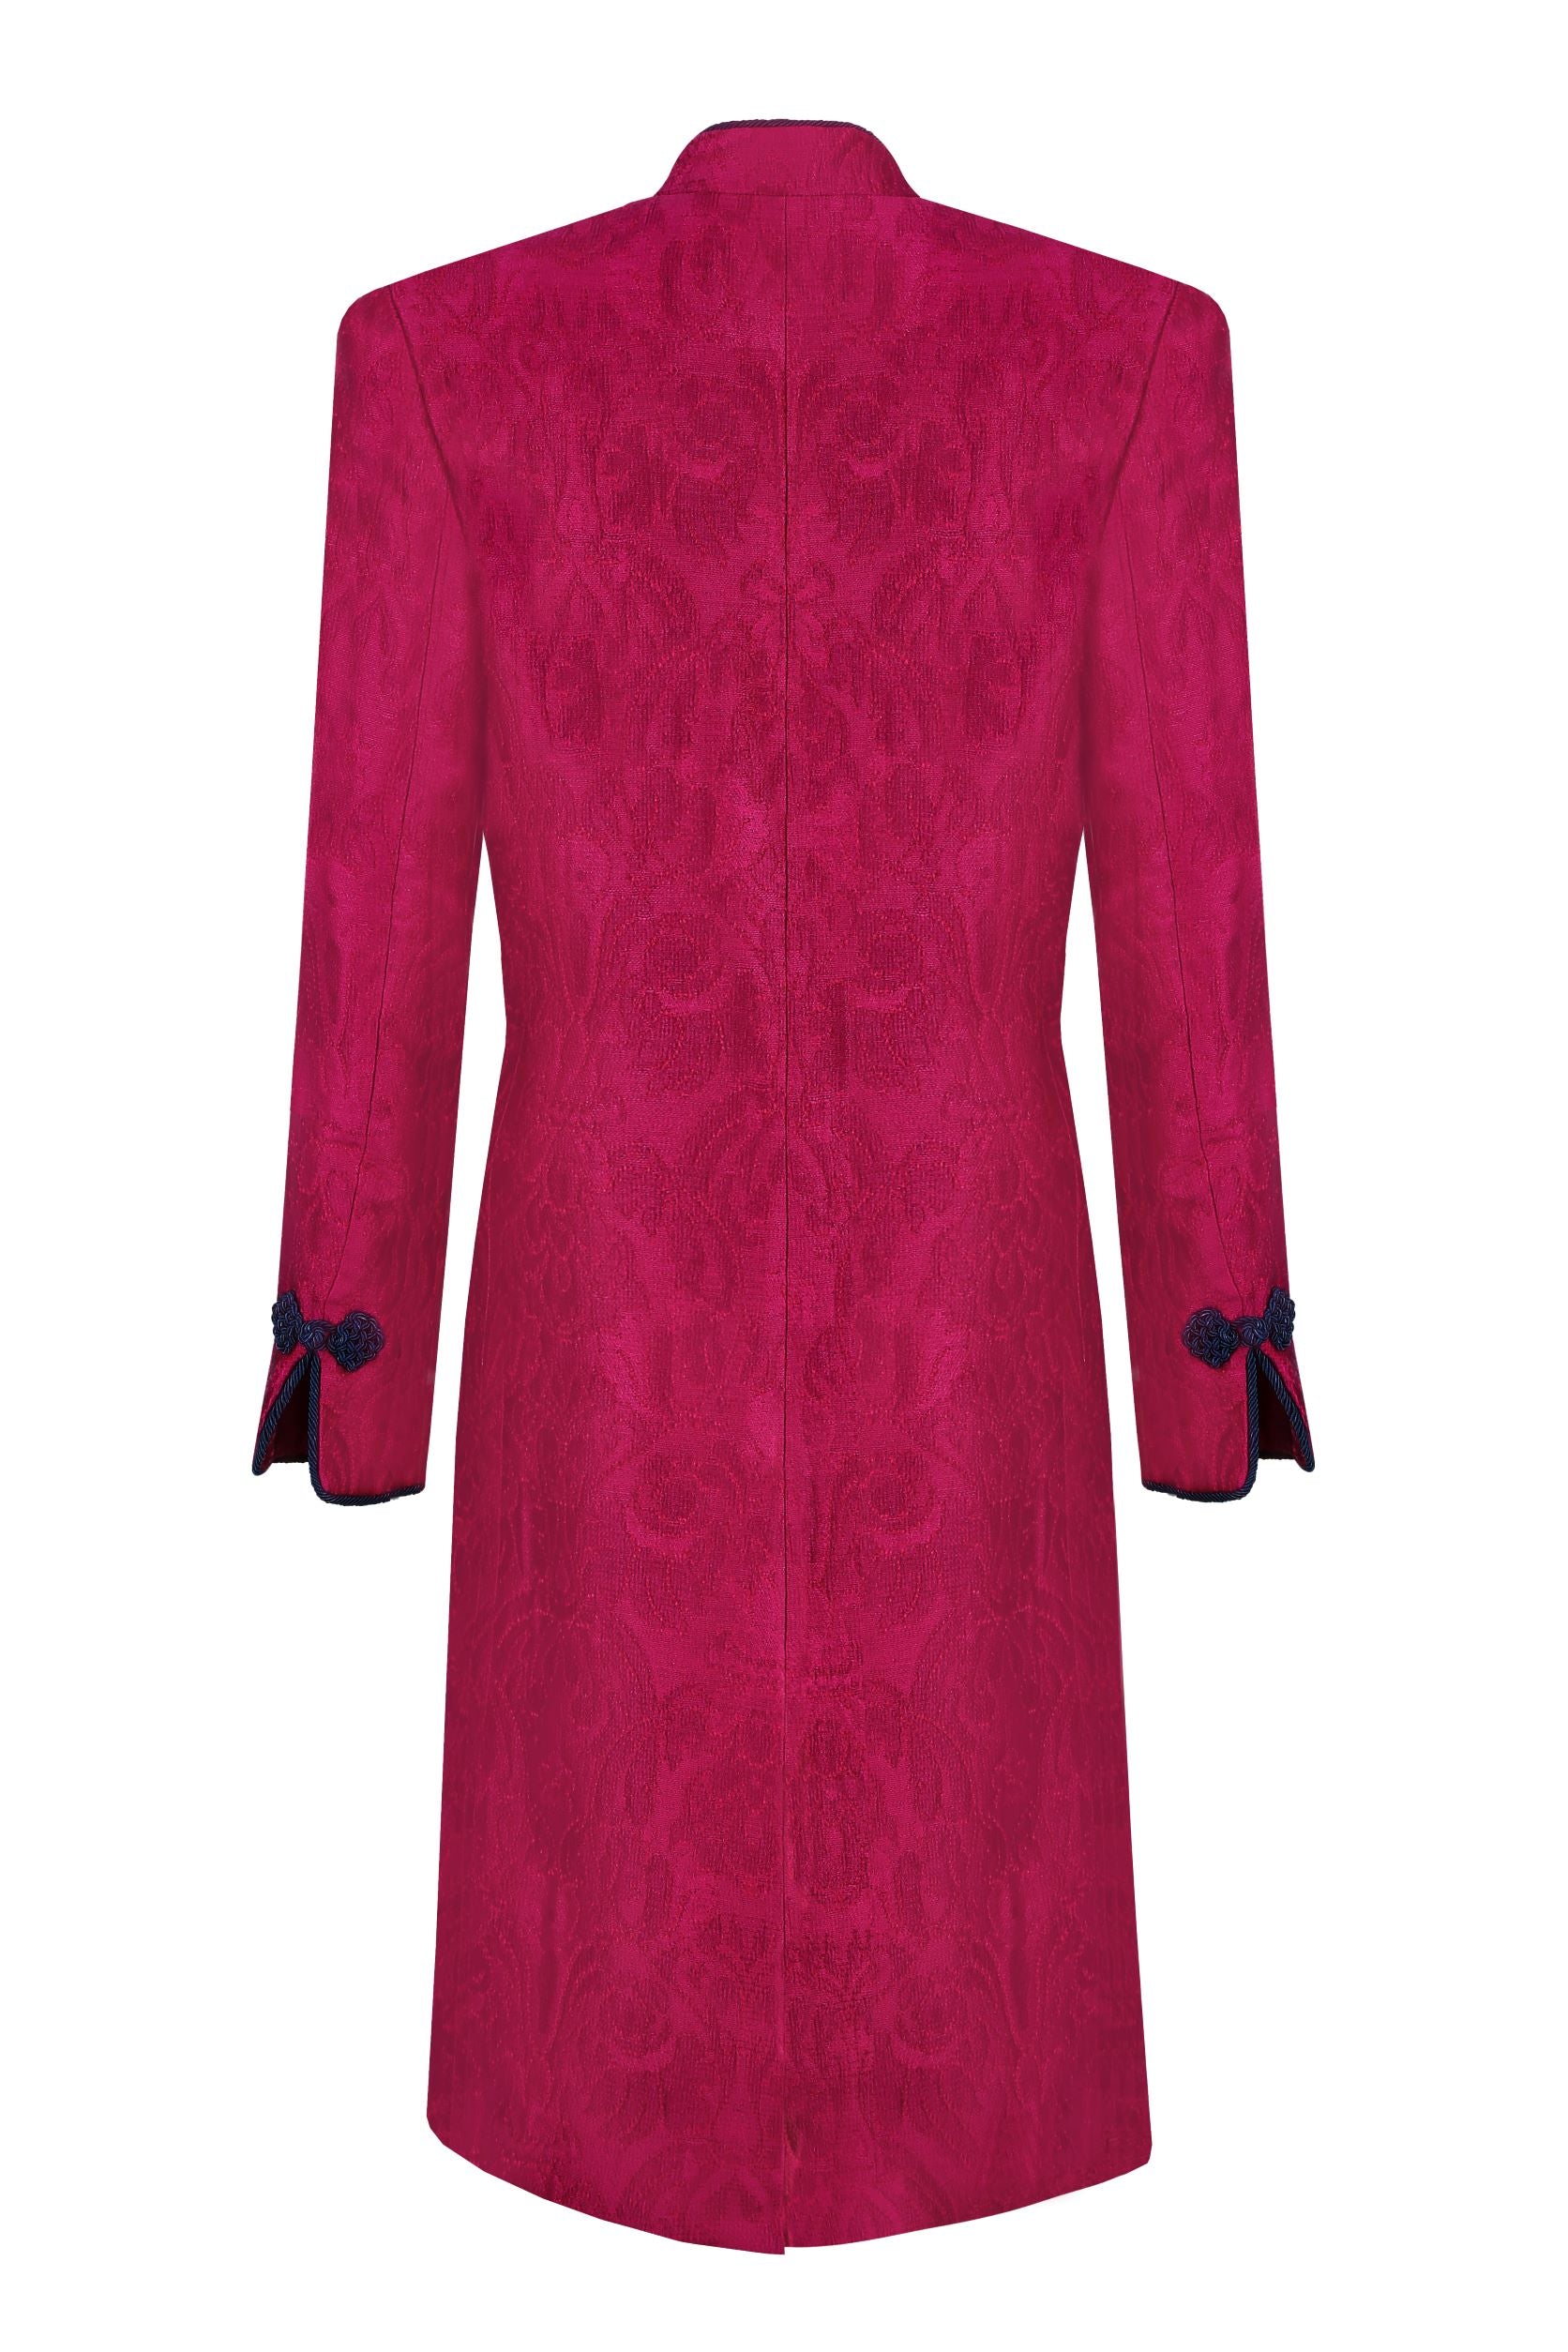 Fuchsia Dress Coat in Winter Brocade with Cord Trim and Frogging  - Vicky